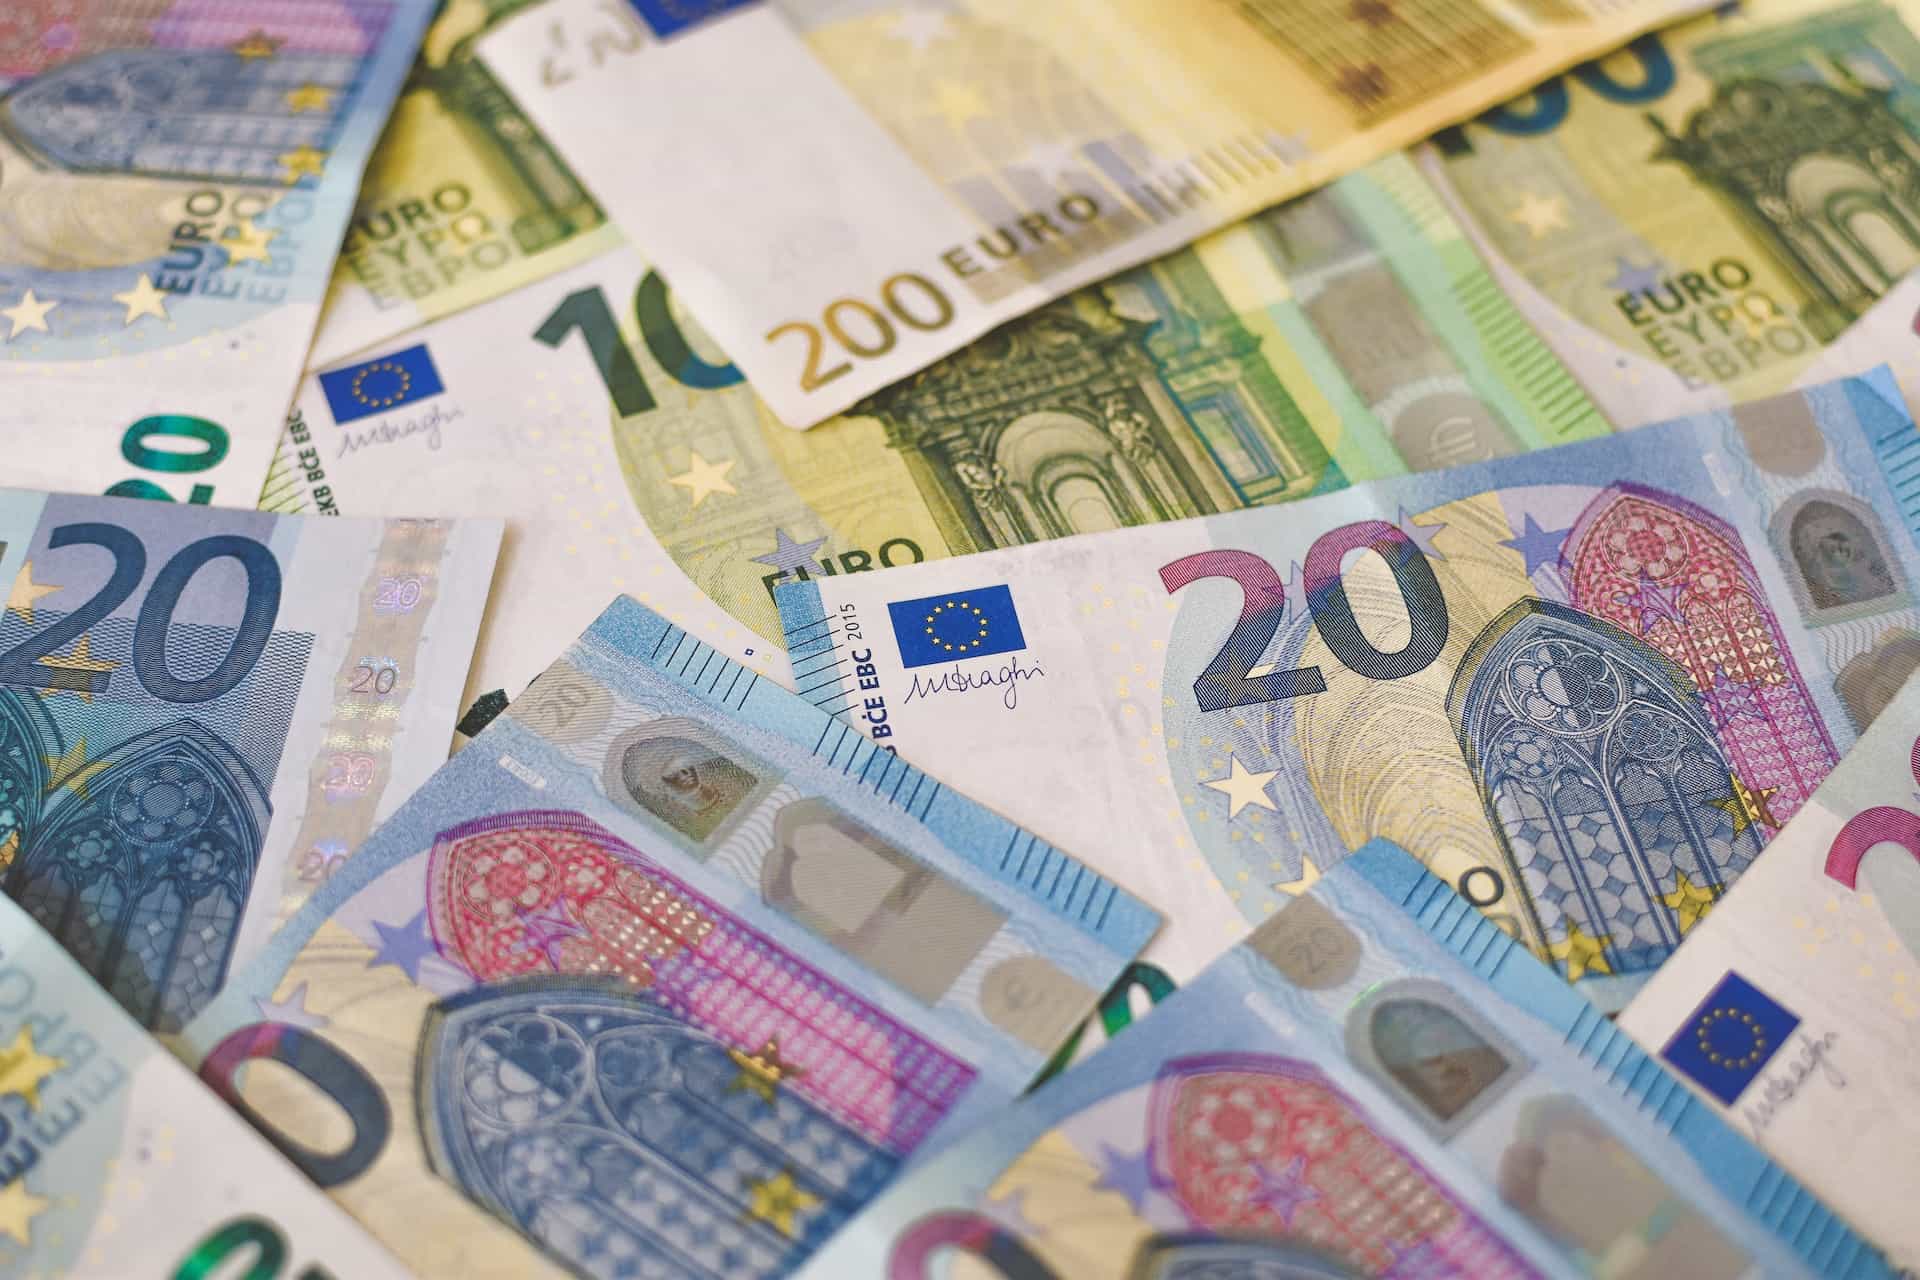 Many Euro bills are spread out on a flat surface.